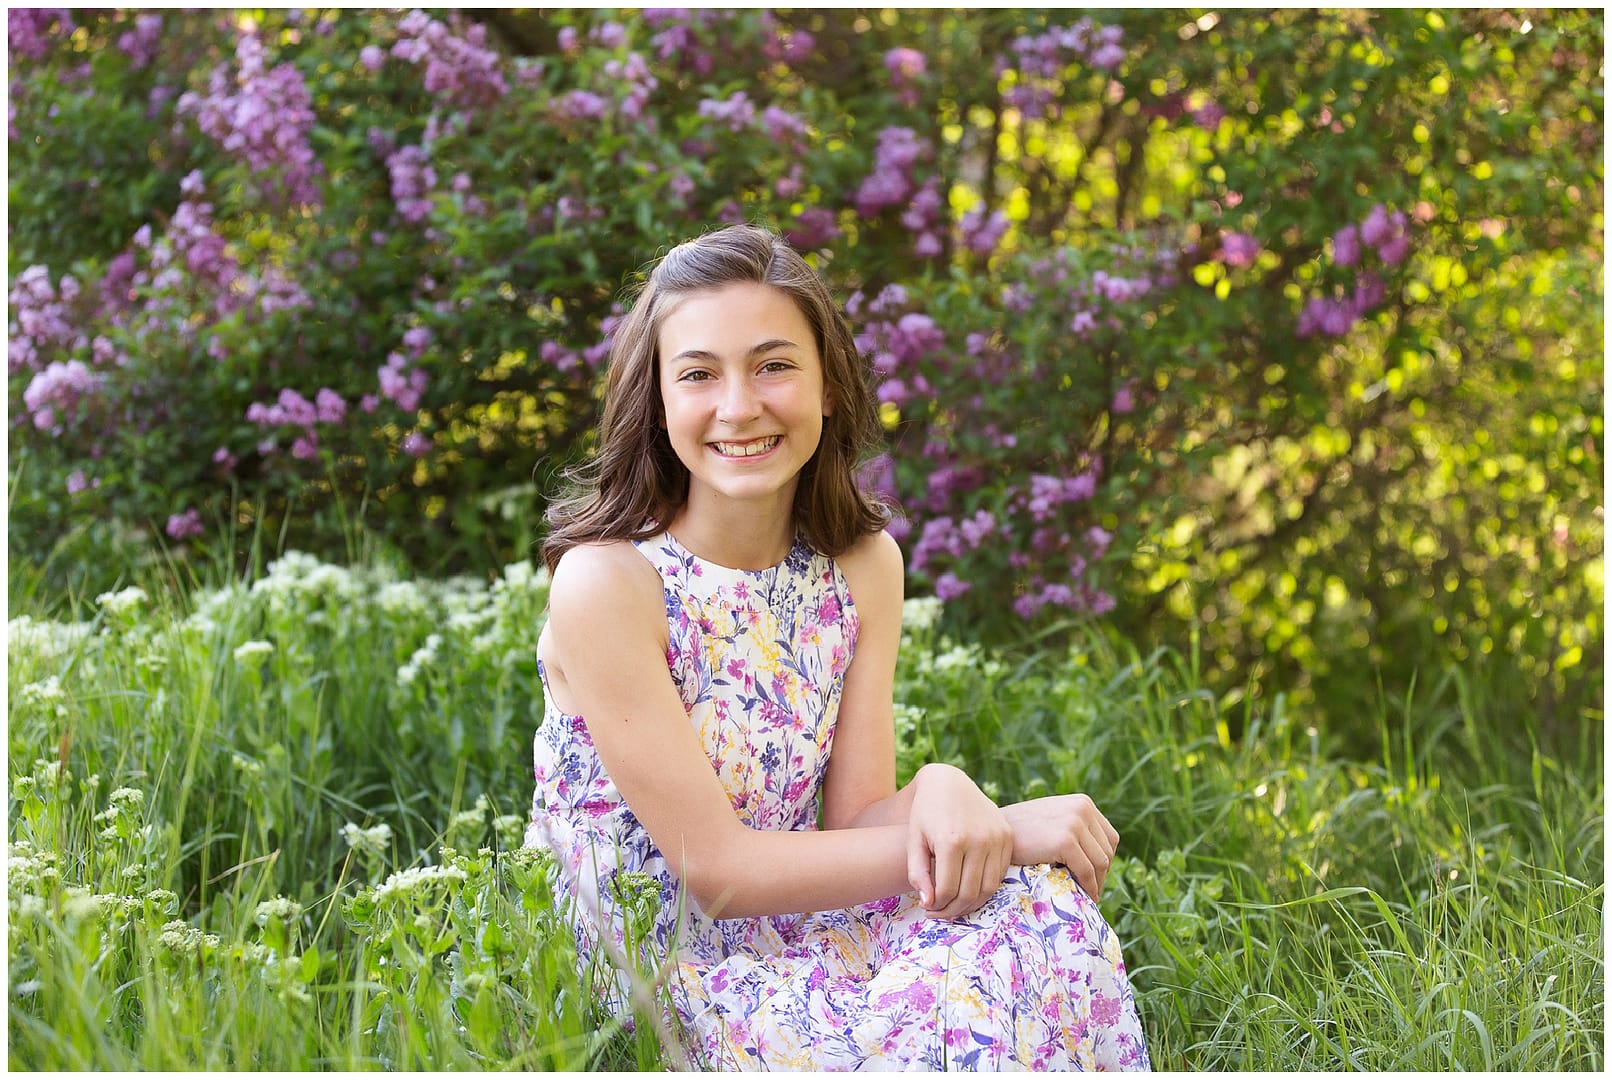 Boise teen sits among blooming lilacs. Photos by Tiffany Hix Photography.